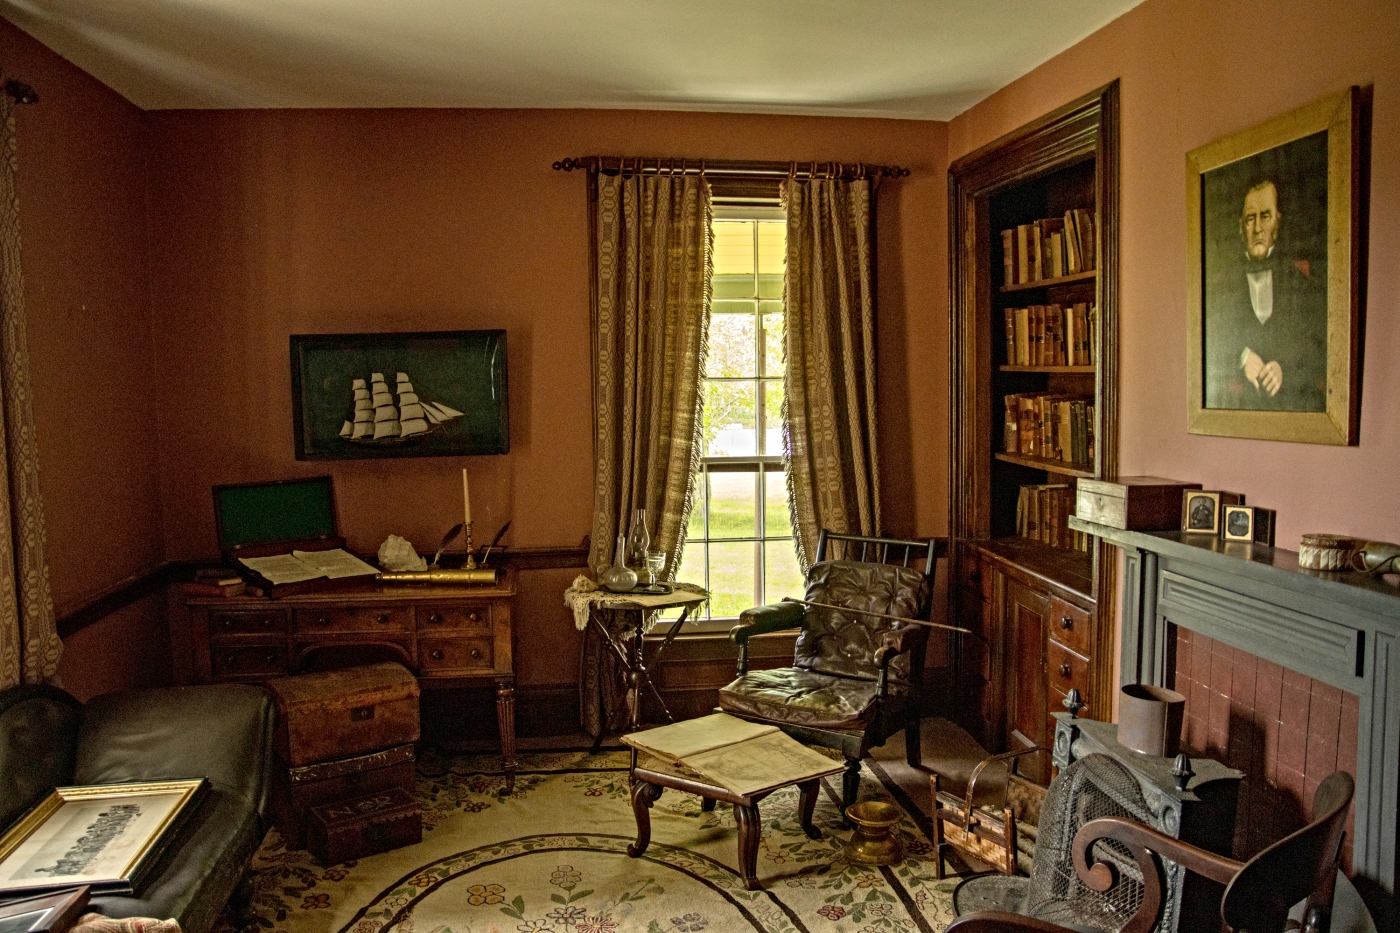 Interior view of sitting room at Green Park